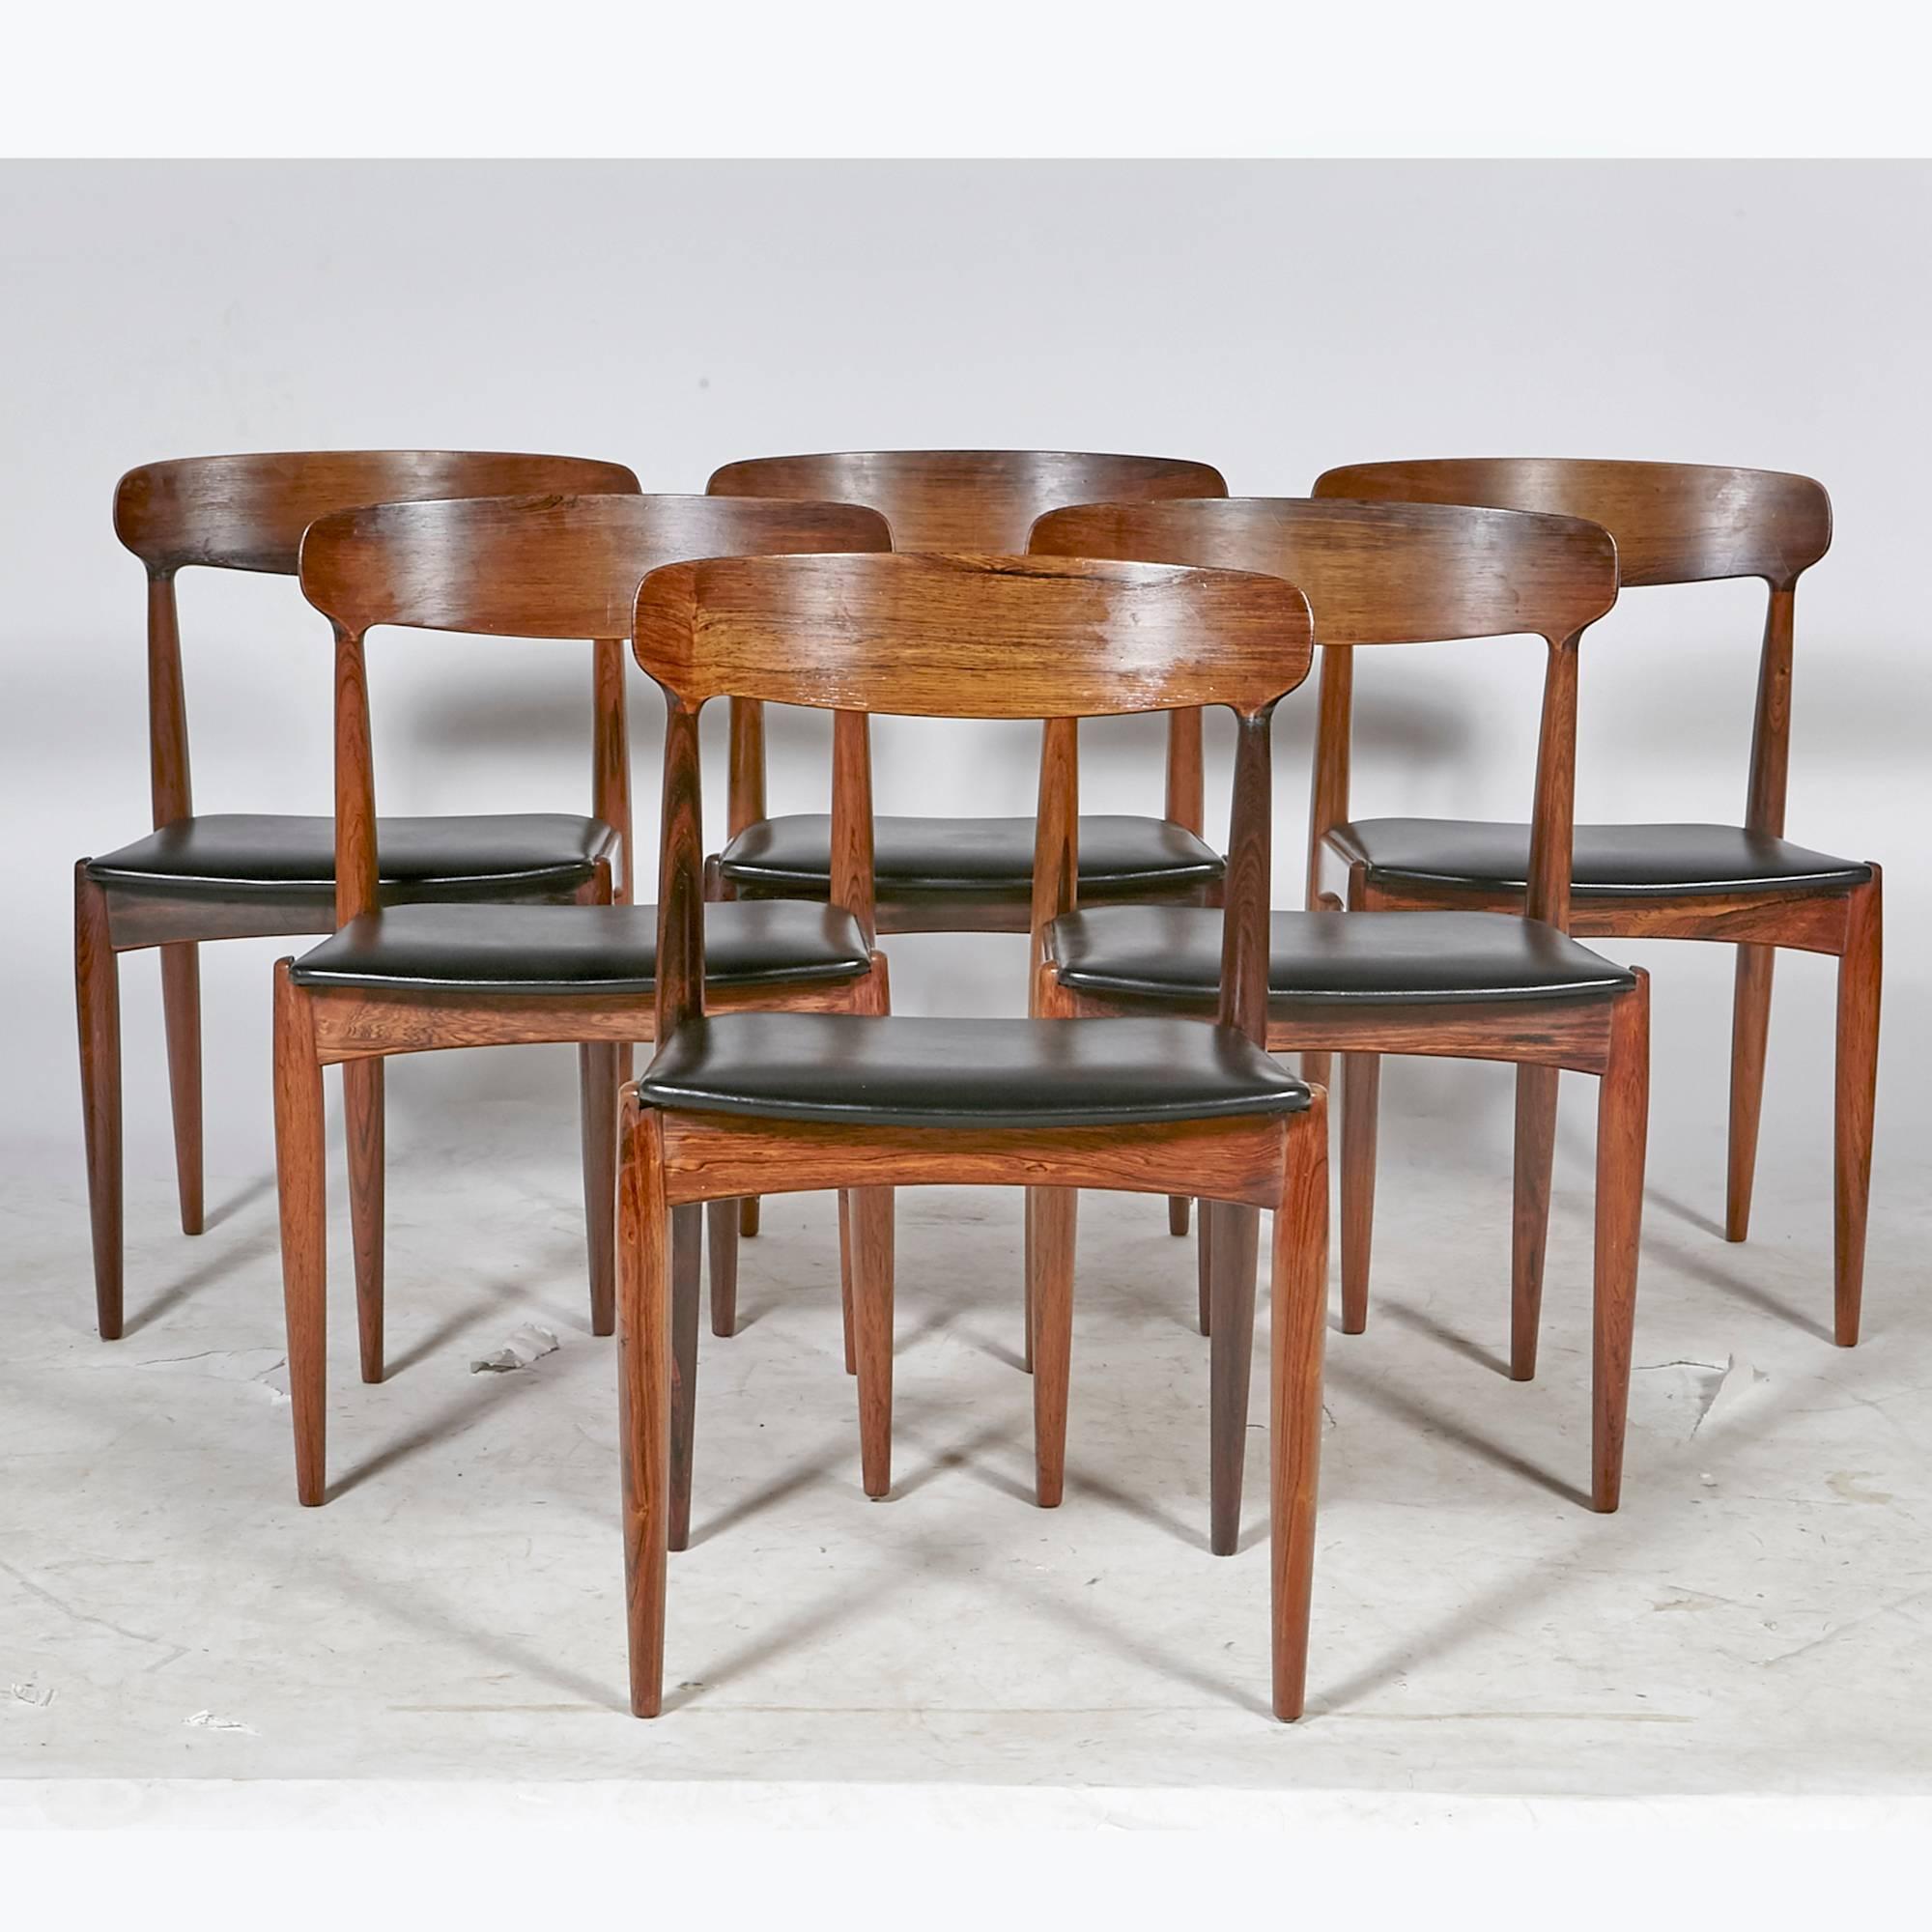 Vintage Scandinavian Modern set of six Danish rosewood dining chairs by Johannes Andersen for Uldum Mobler, 1960s. Refinished condition and new black Naugahyde seats. Marked underneath.